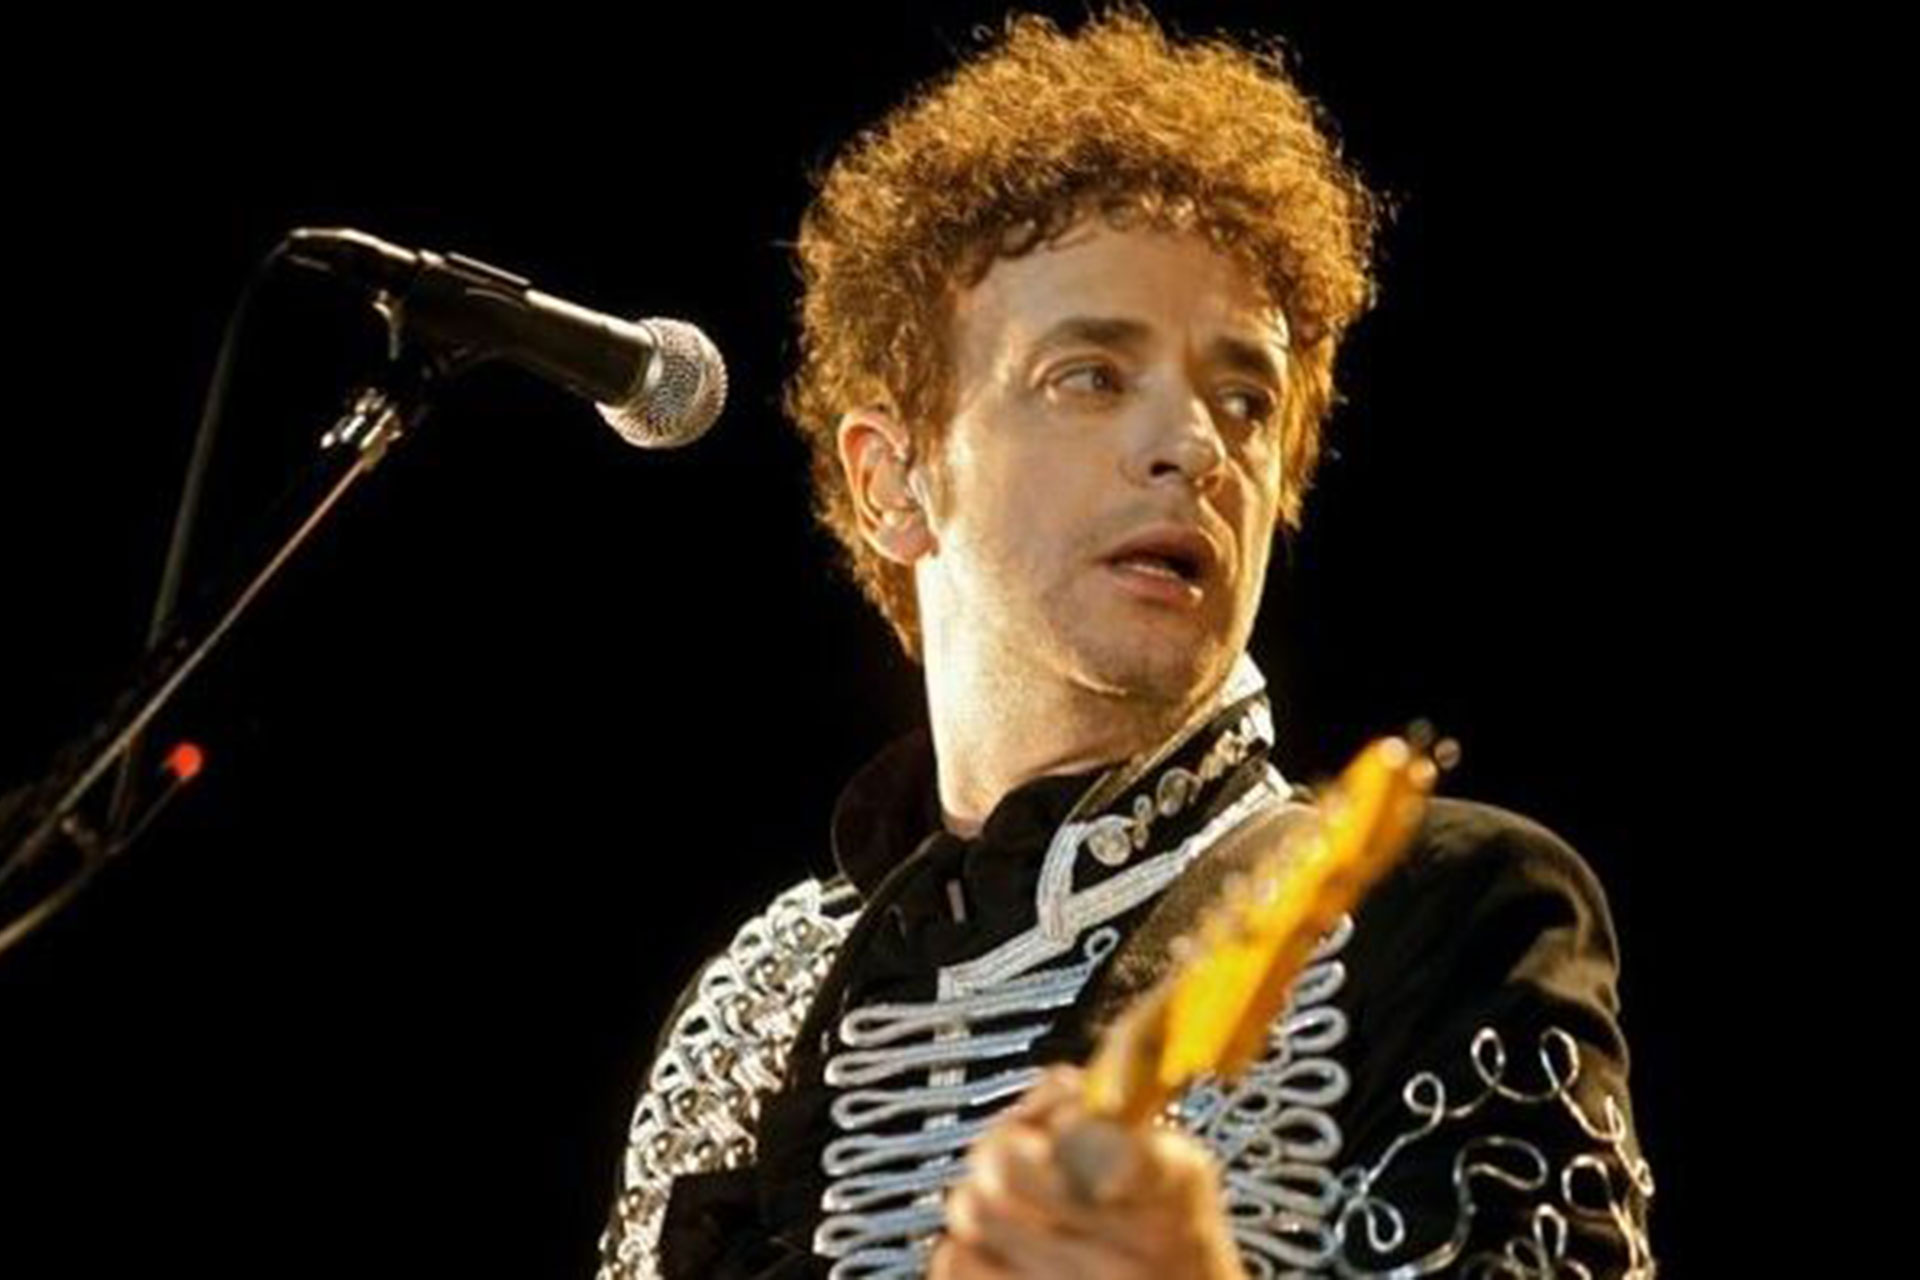 Fuerza Natural, the tour before the tragic event that never returned Cerati to the stage (Cerati.com)